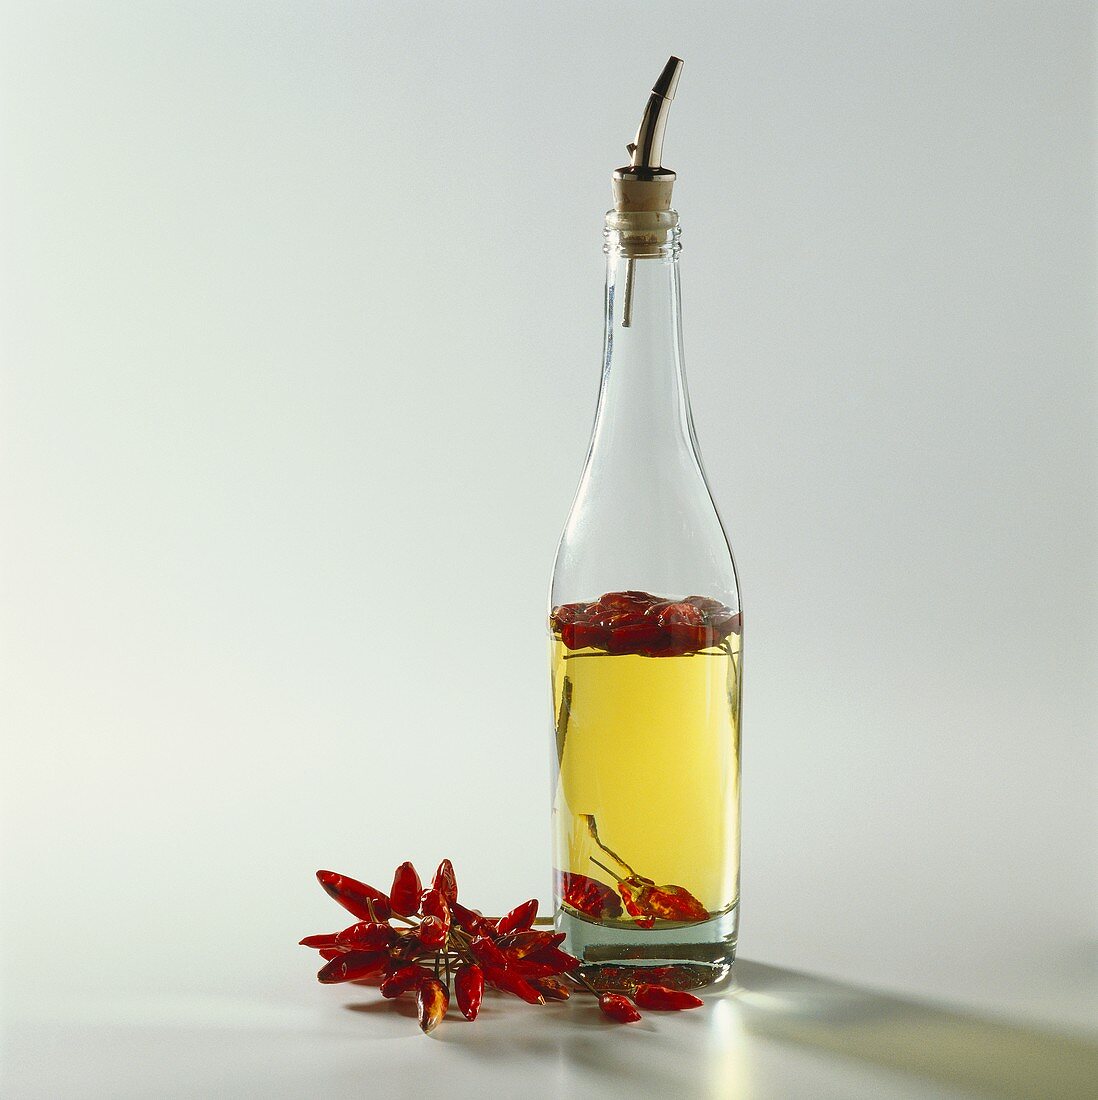 A bottle of chili oil, dried red chilies beside it